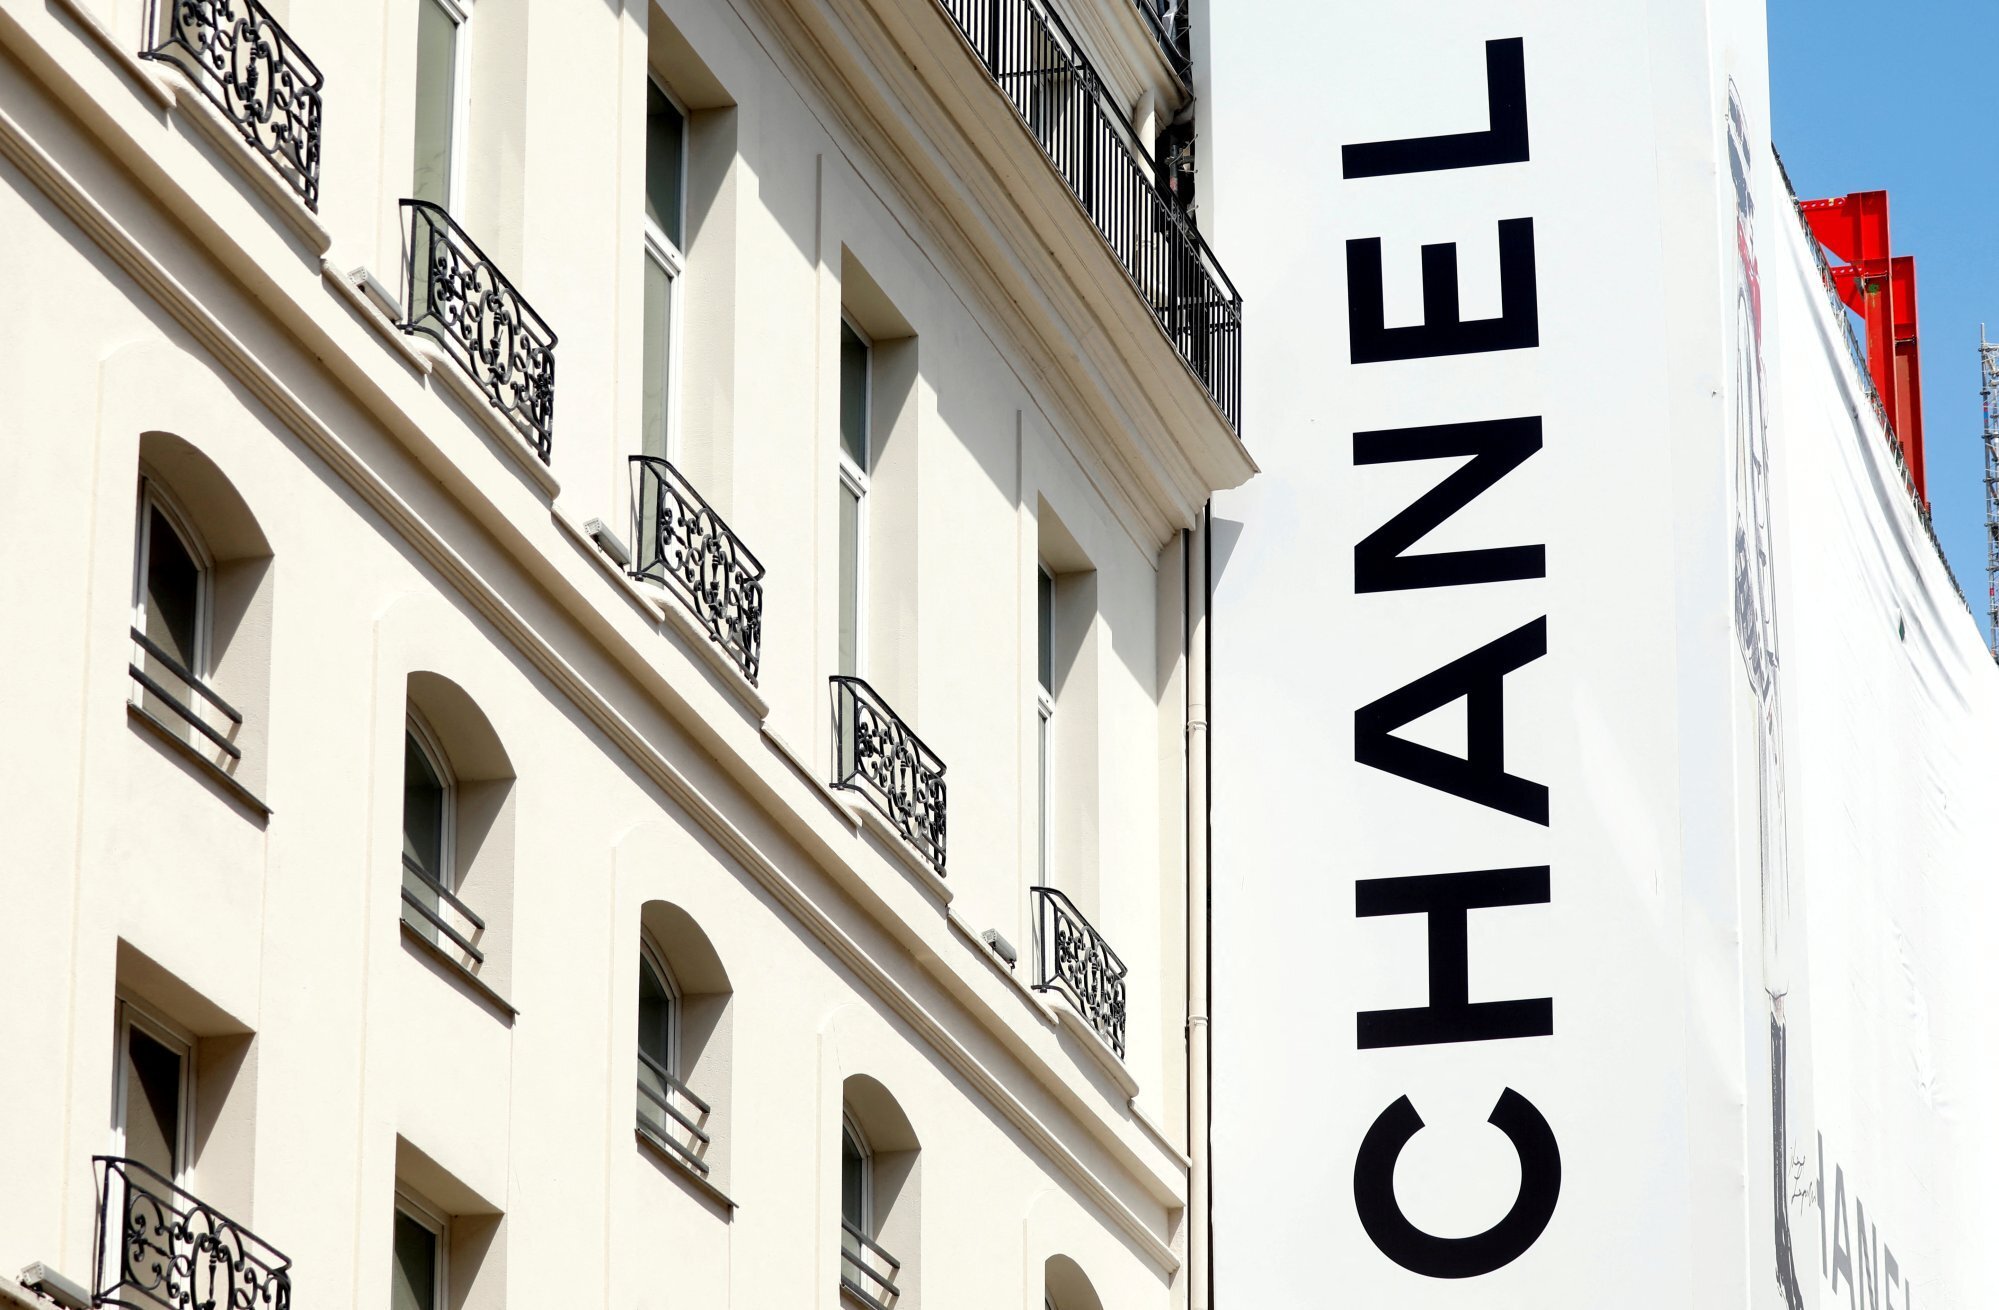 Chanel, LVMH, Kering add to brands closing Russia stores